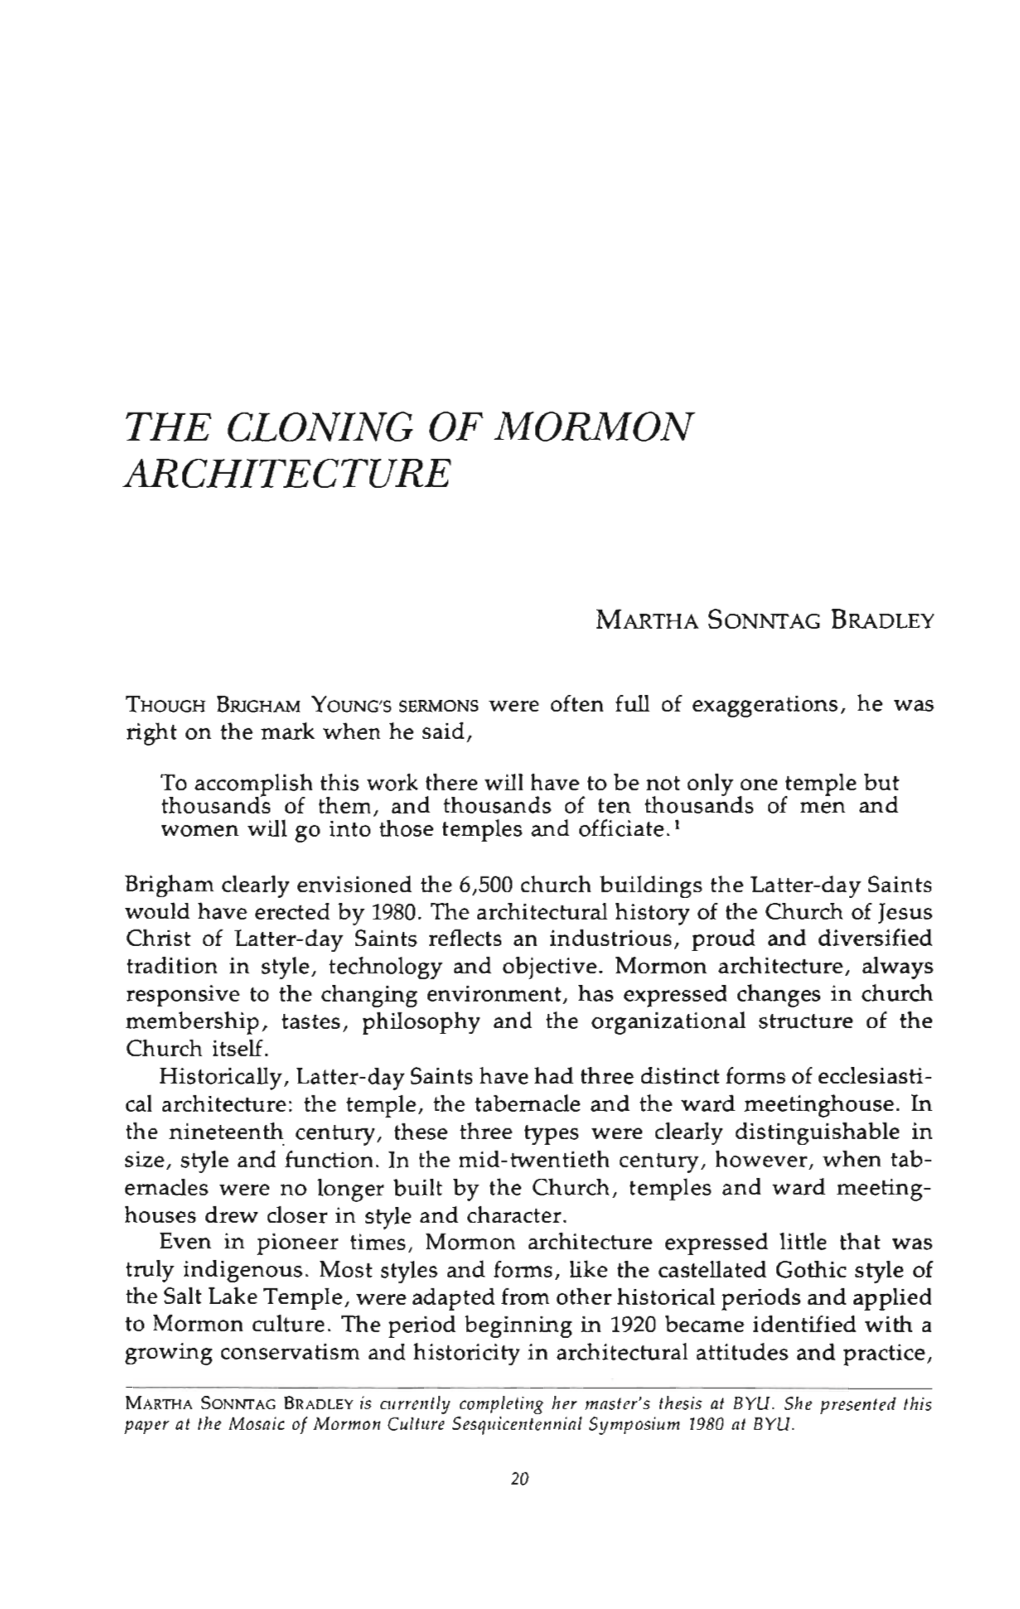 The Cloning of Mormon Architecture